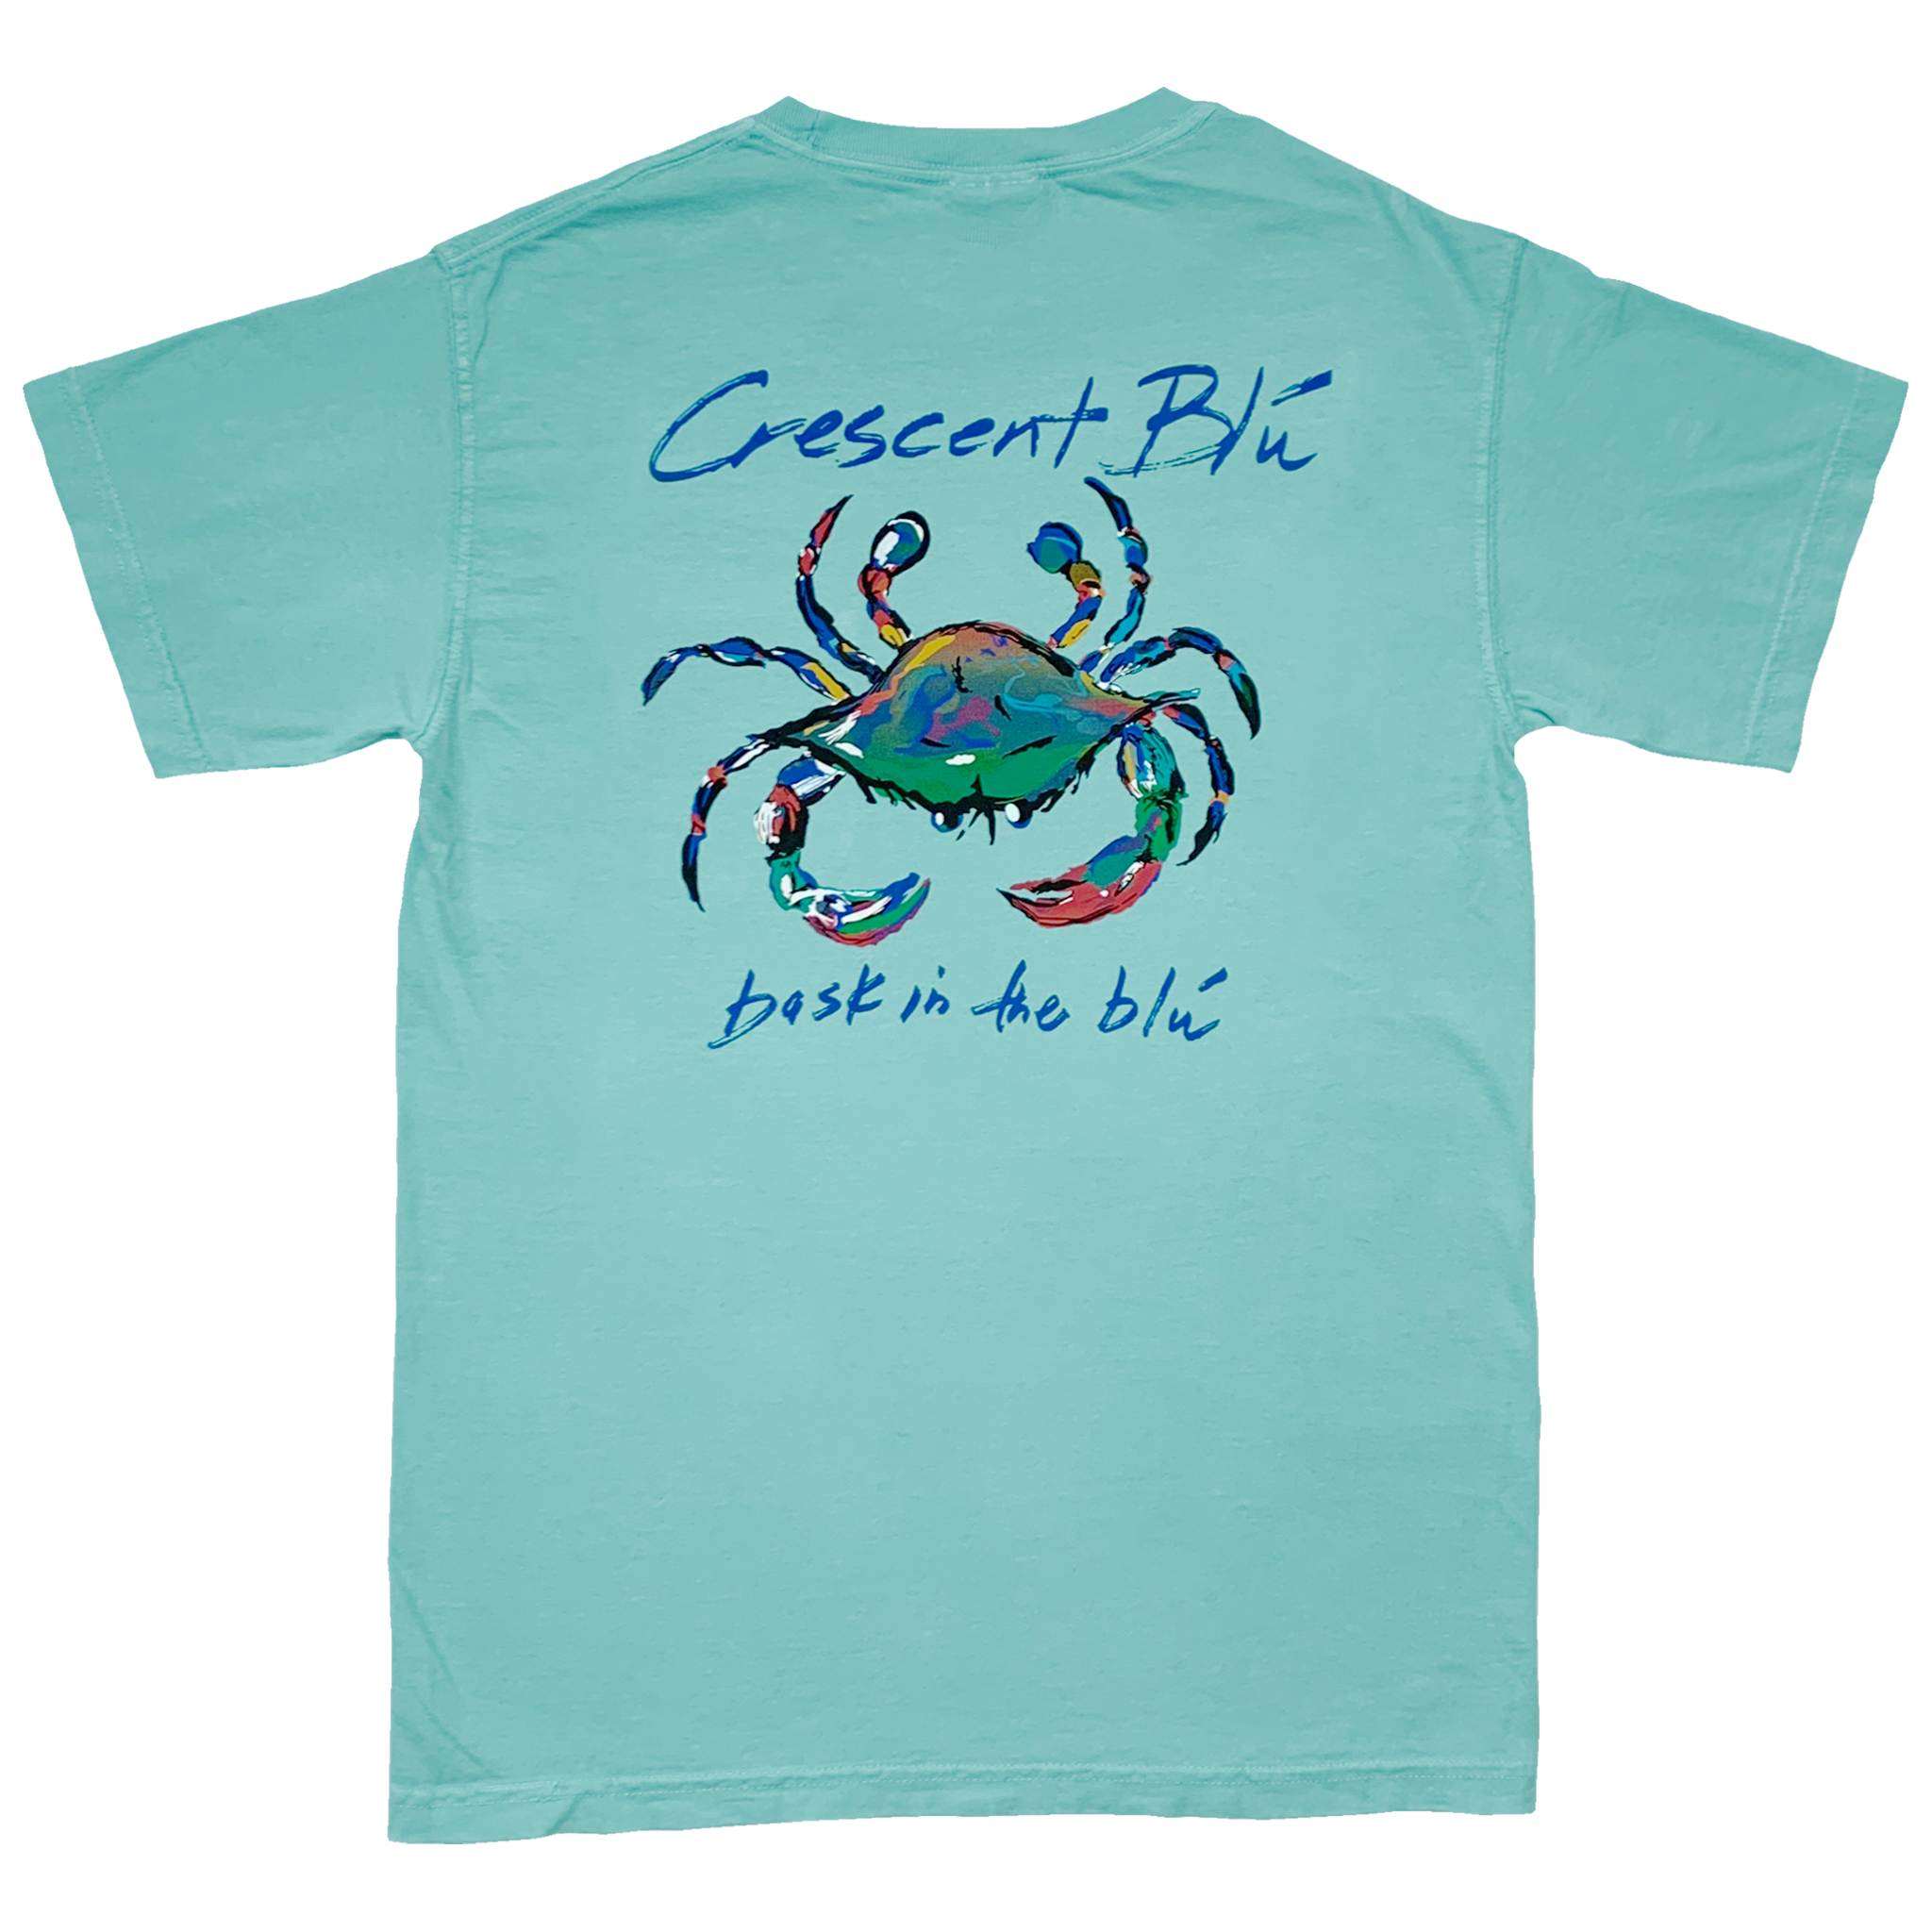 Adult Short Sleeve Chalky Mint t-shirt view of the back with large multi-colored crab logo and Crescent Blu printed